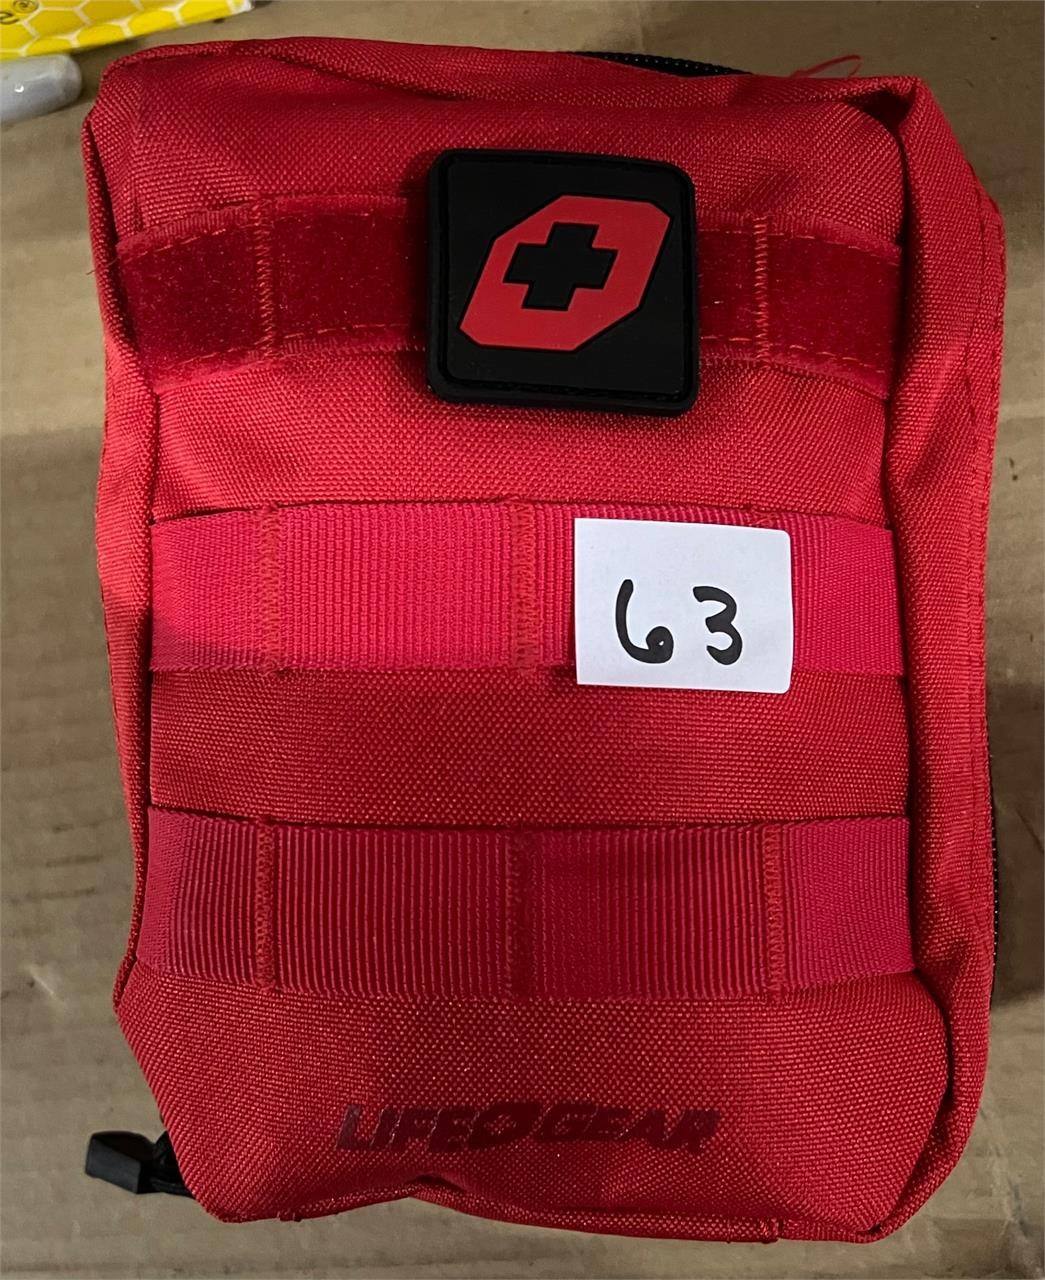 Life Gear First Aid Kit, Strap Is Torn